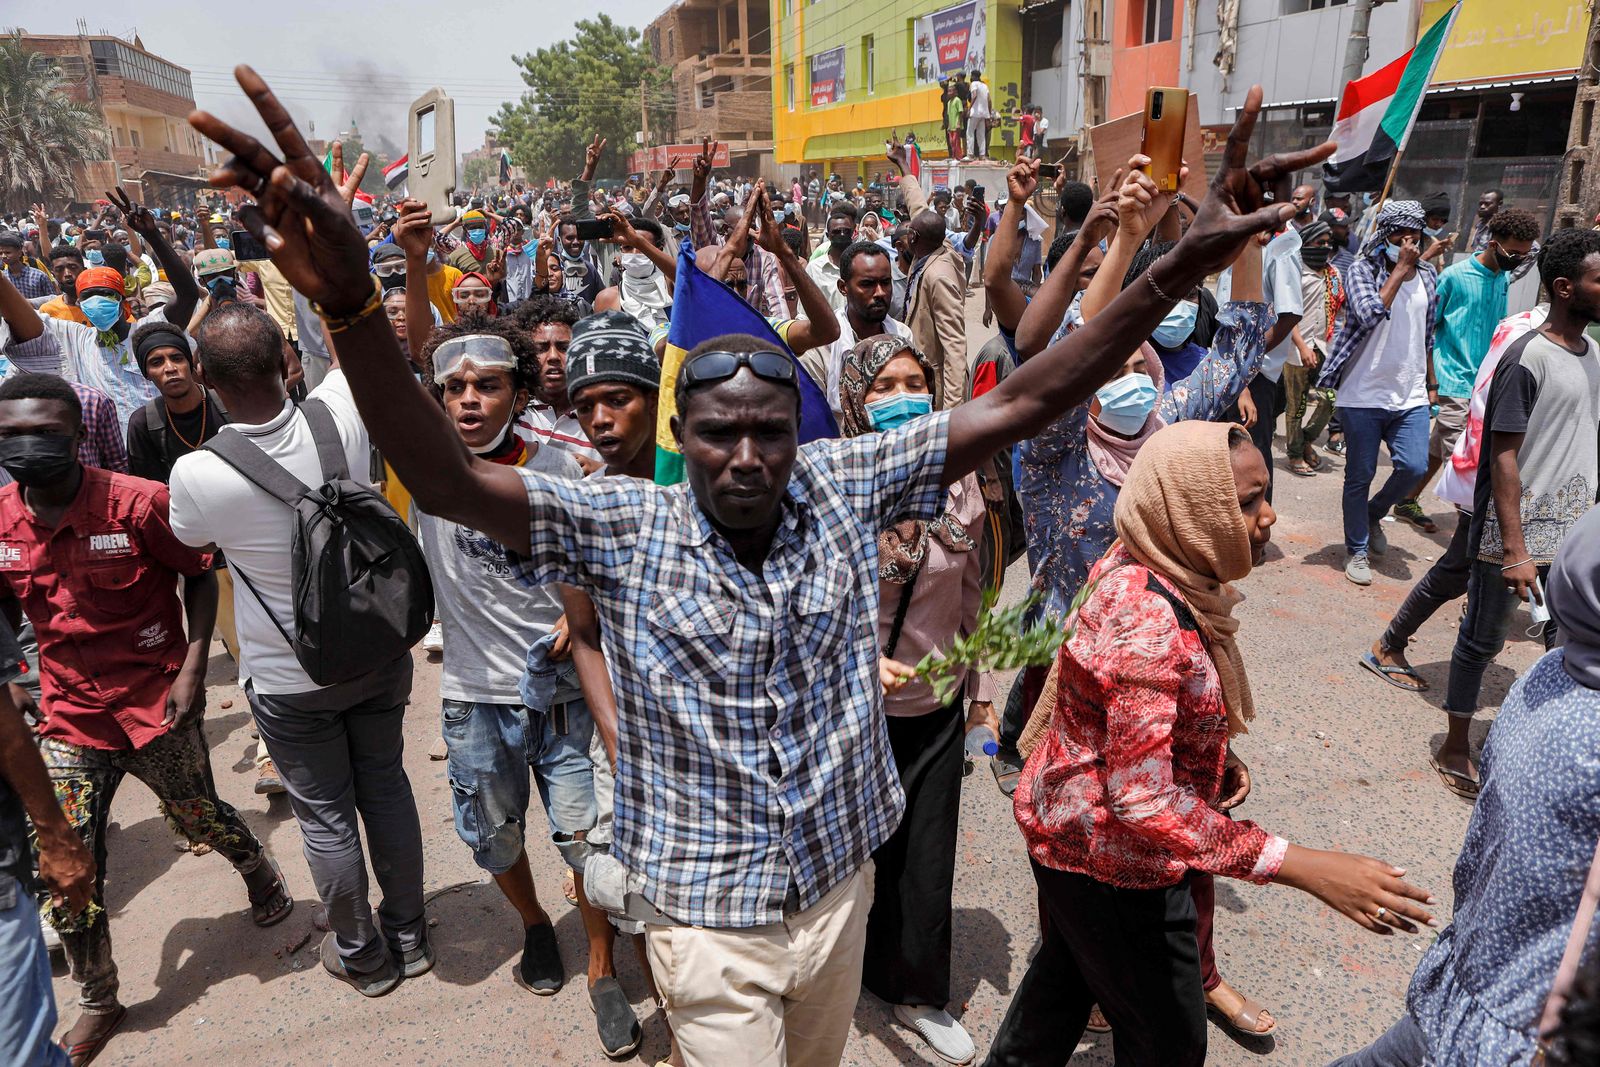 Anti-coup protesters chant slogans as they march during mass demonstrations against military rule in the centre of Sudan's capital Khartoum on June 30, 2022. - At least six Sudanese demonstrators were killed as security forces sought to quash mass rallies of protesters demanding an end to military rule, pro-democracy medics said. In one of the most violent days this year in an ongoing crackdown on the anti-coup movement, AFP correspondents reported security forces firing tear gas and stun grenades to disperse tens of thousands of protesters. (Photo by AFP) - AFP